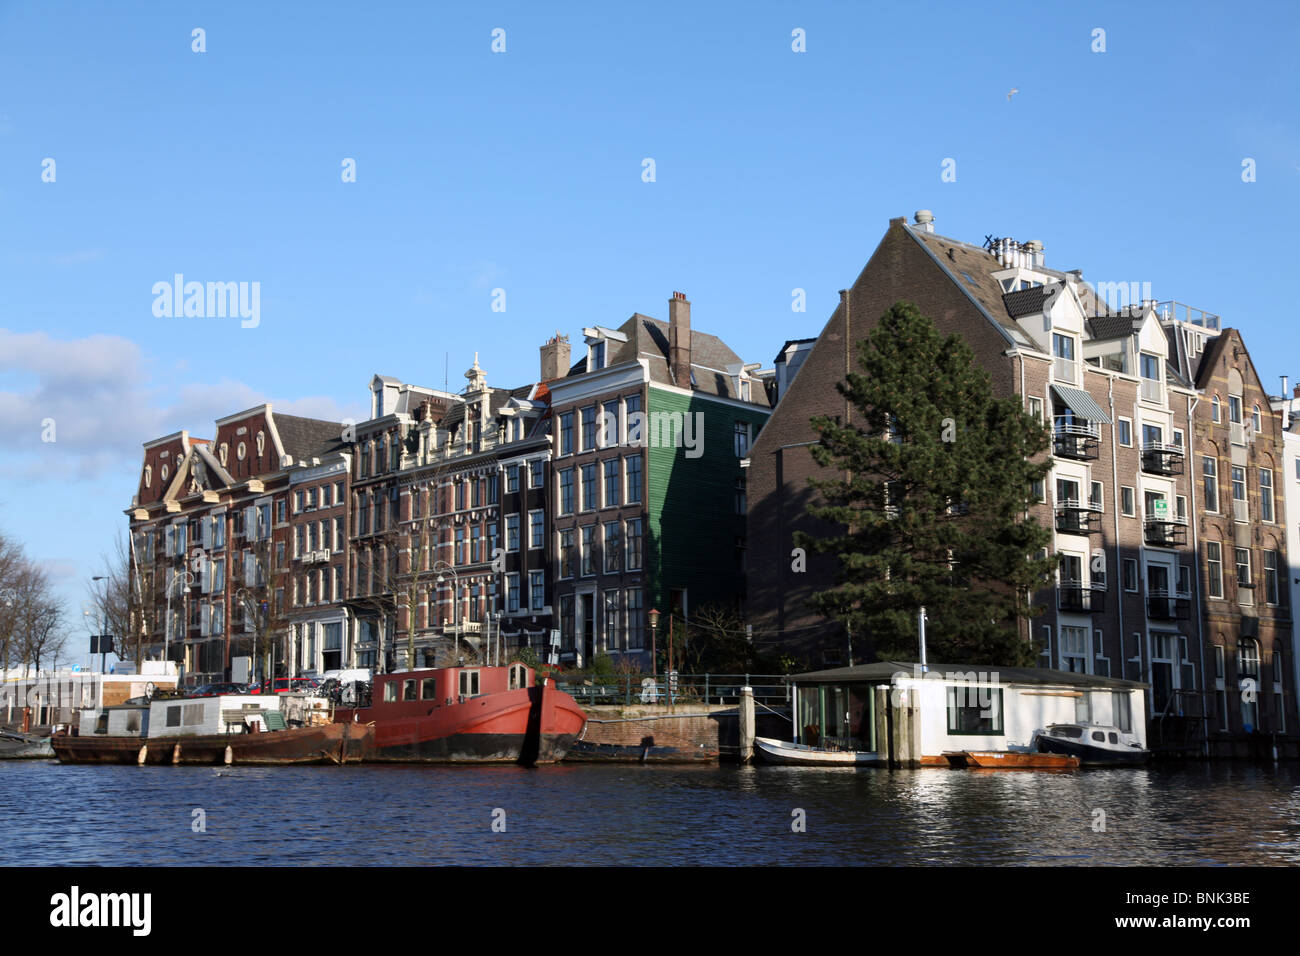 Canalside buildings seen from canal boat in Amsterdam Stock Photo